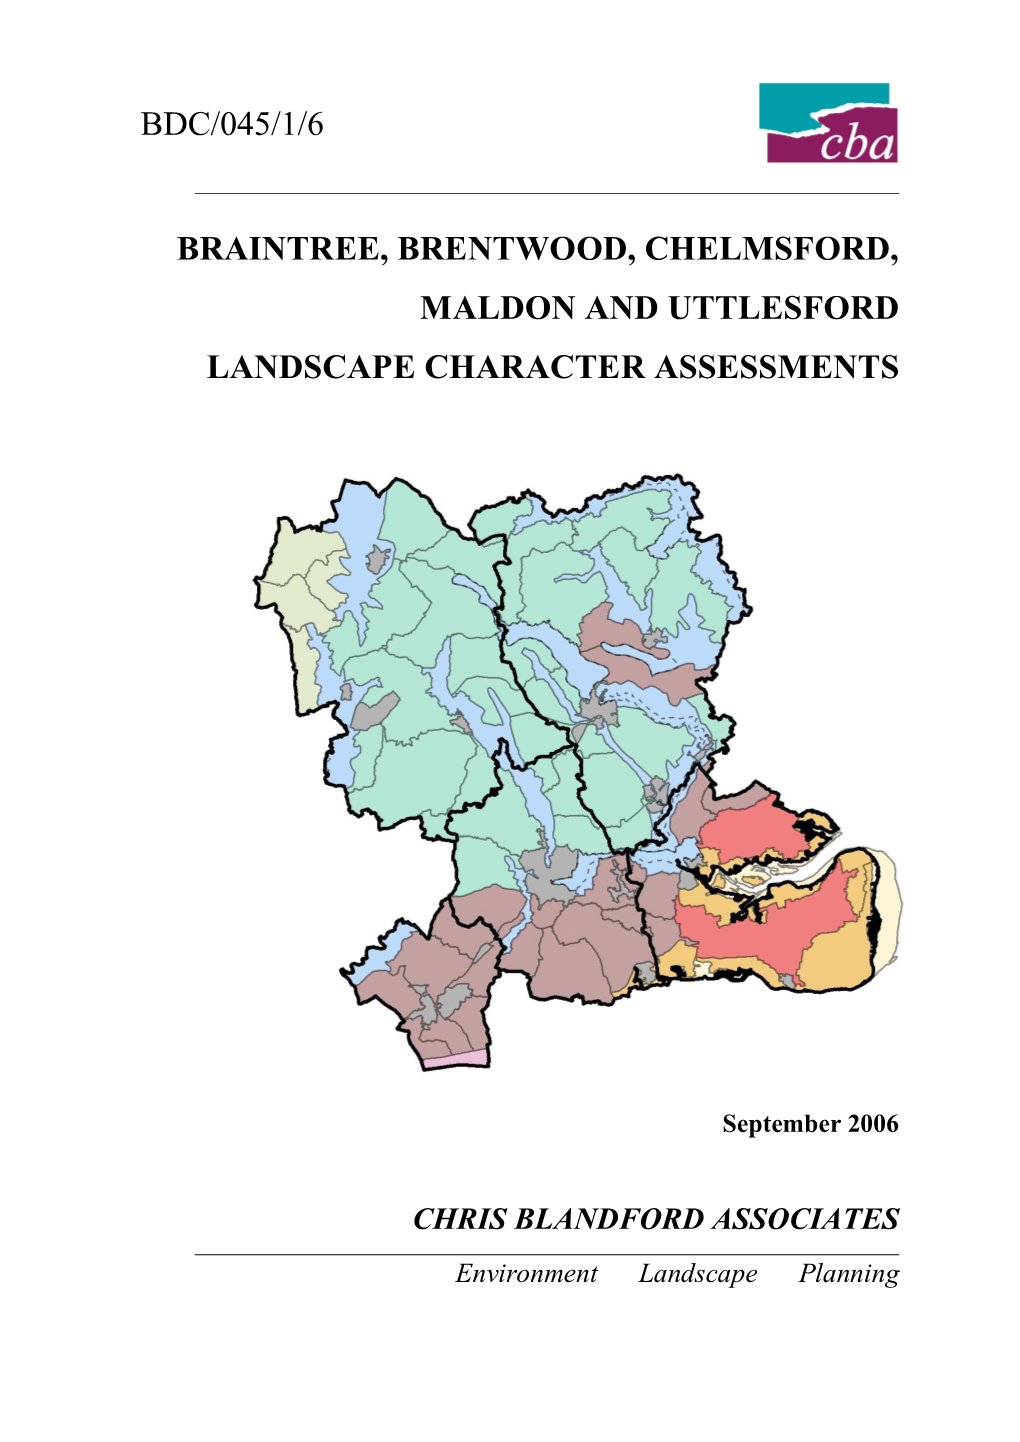 Braintree, Brentwood, Chelmsford, Maldon and Uttlesford Landscape Character Assessments